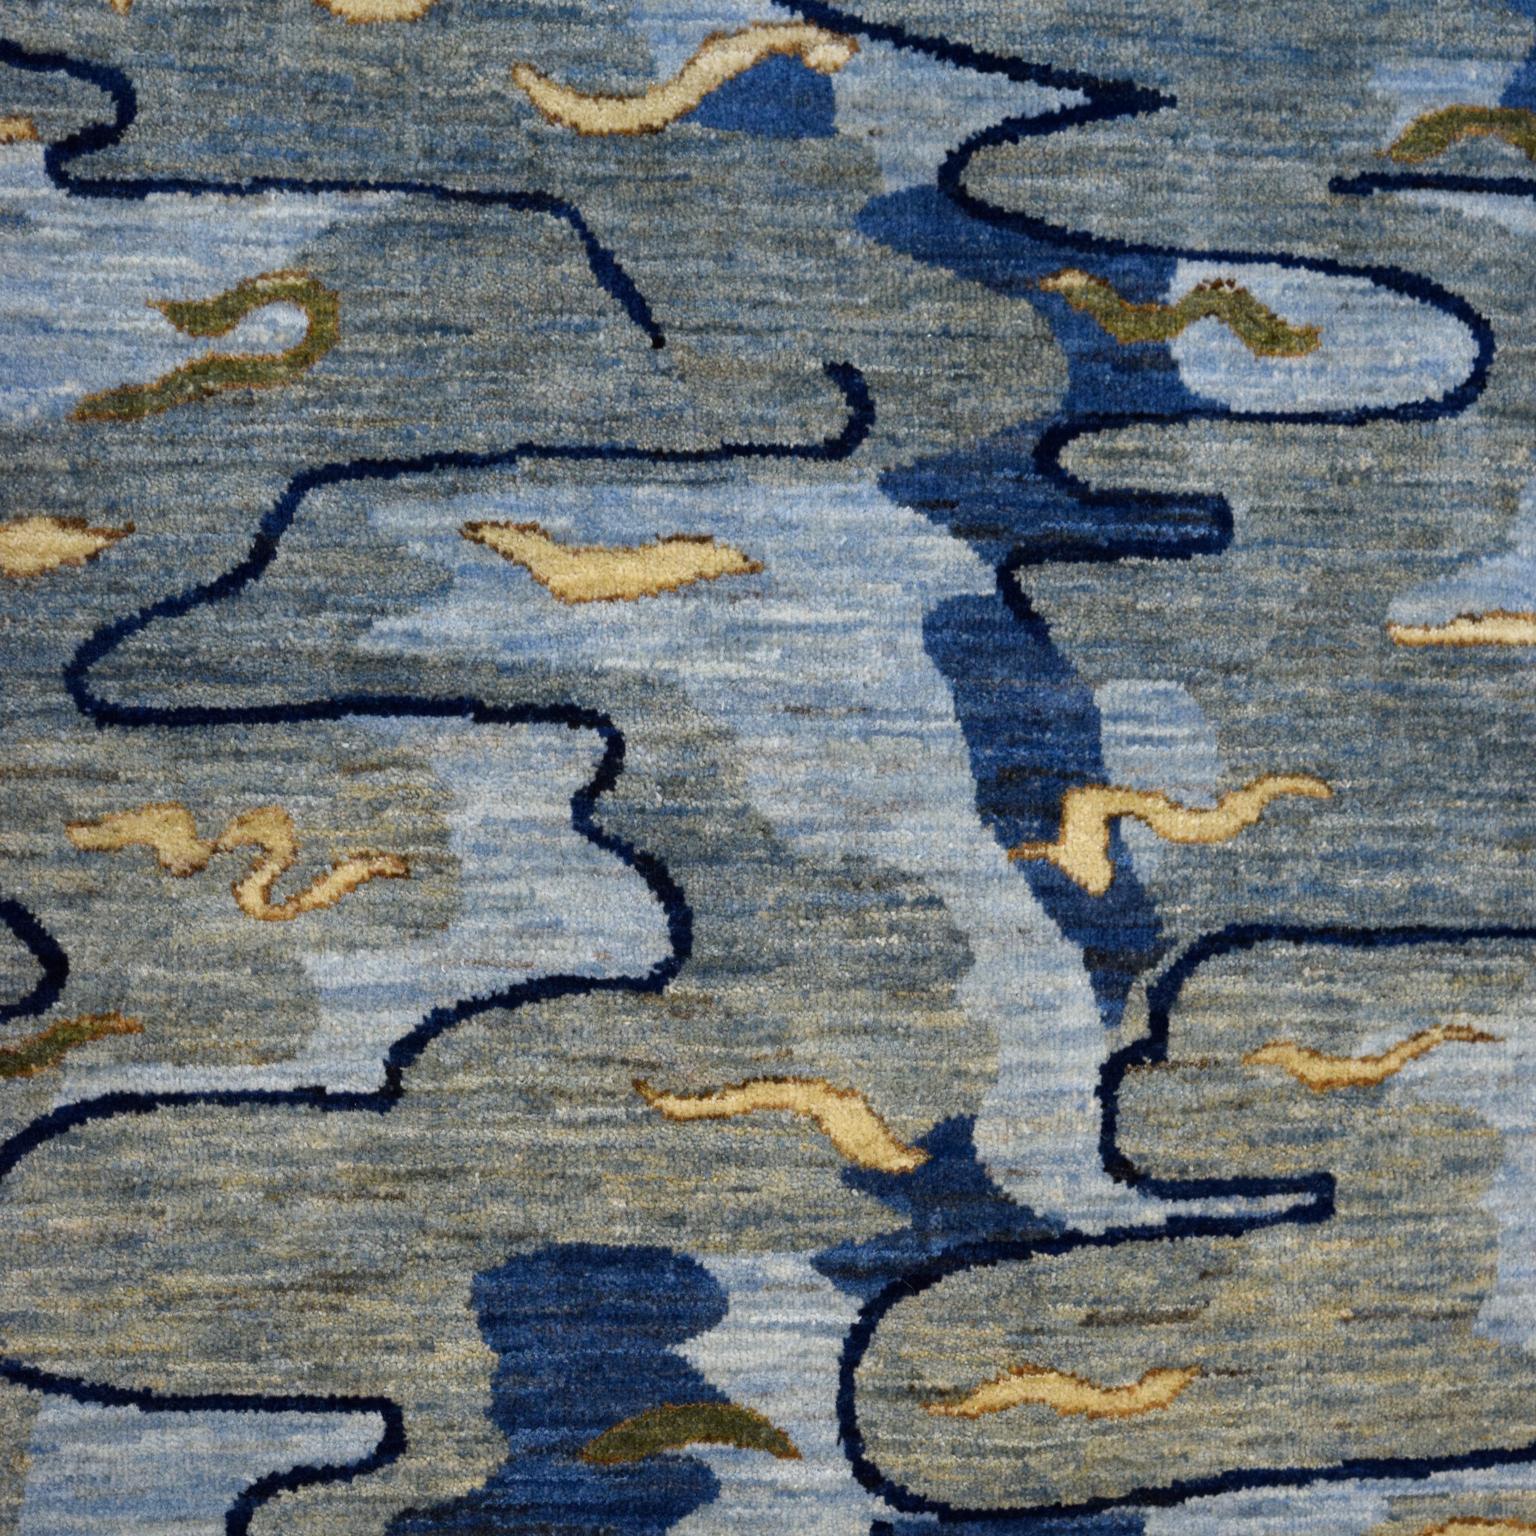 Rippling gently across a lake’s surface before colliding with the shoreline and stylized plant motifs, this hand-knotted carpet, titled Reflections, measures 4’11” x 6’8” and belongs to the Orley Shabahang Art Nouveau collection. The composition of